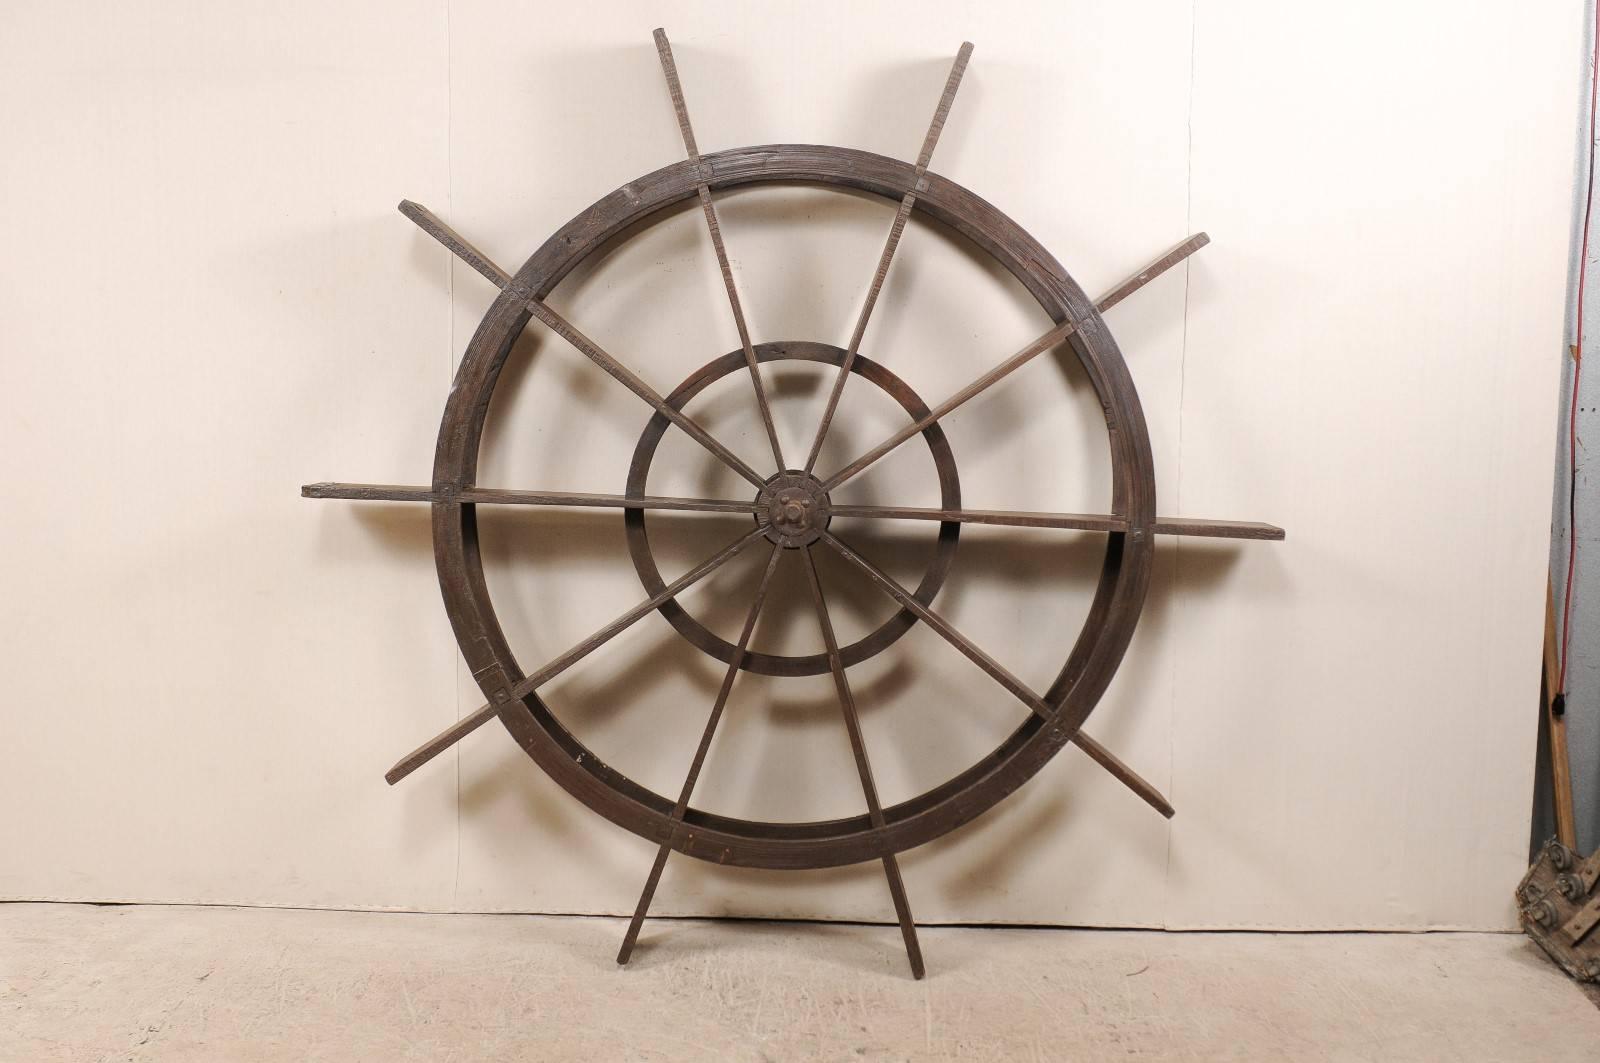 A large antique water wheel from Kerala, India. This Kerala water wheel which stands at more than 7 ft tall, also known as a 